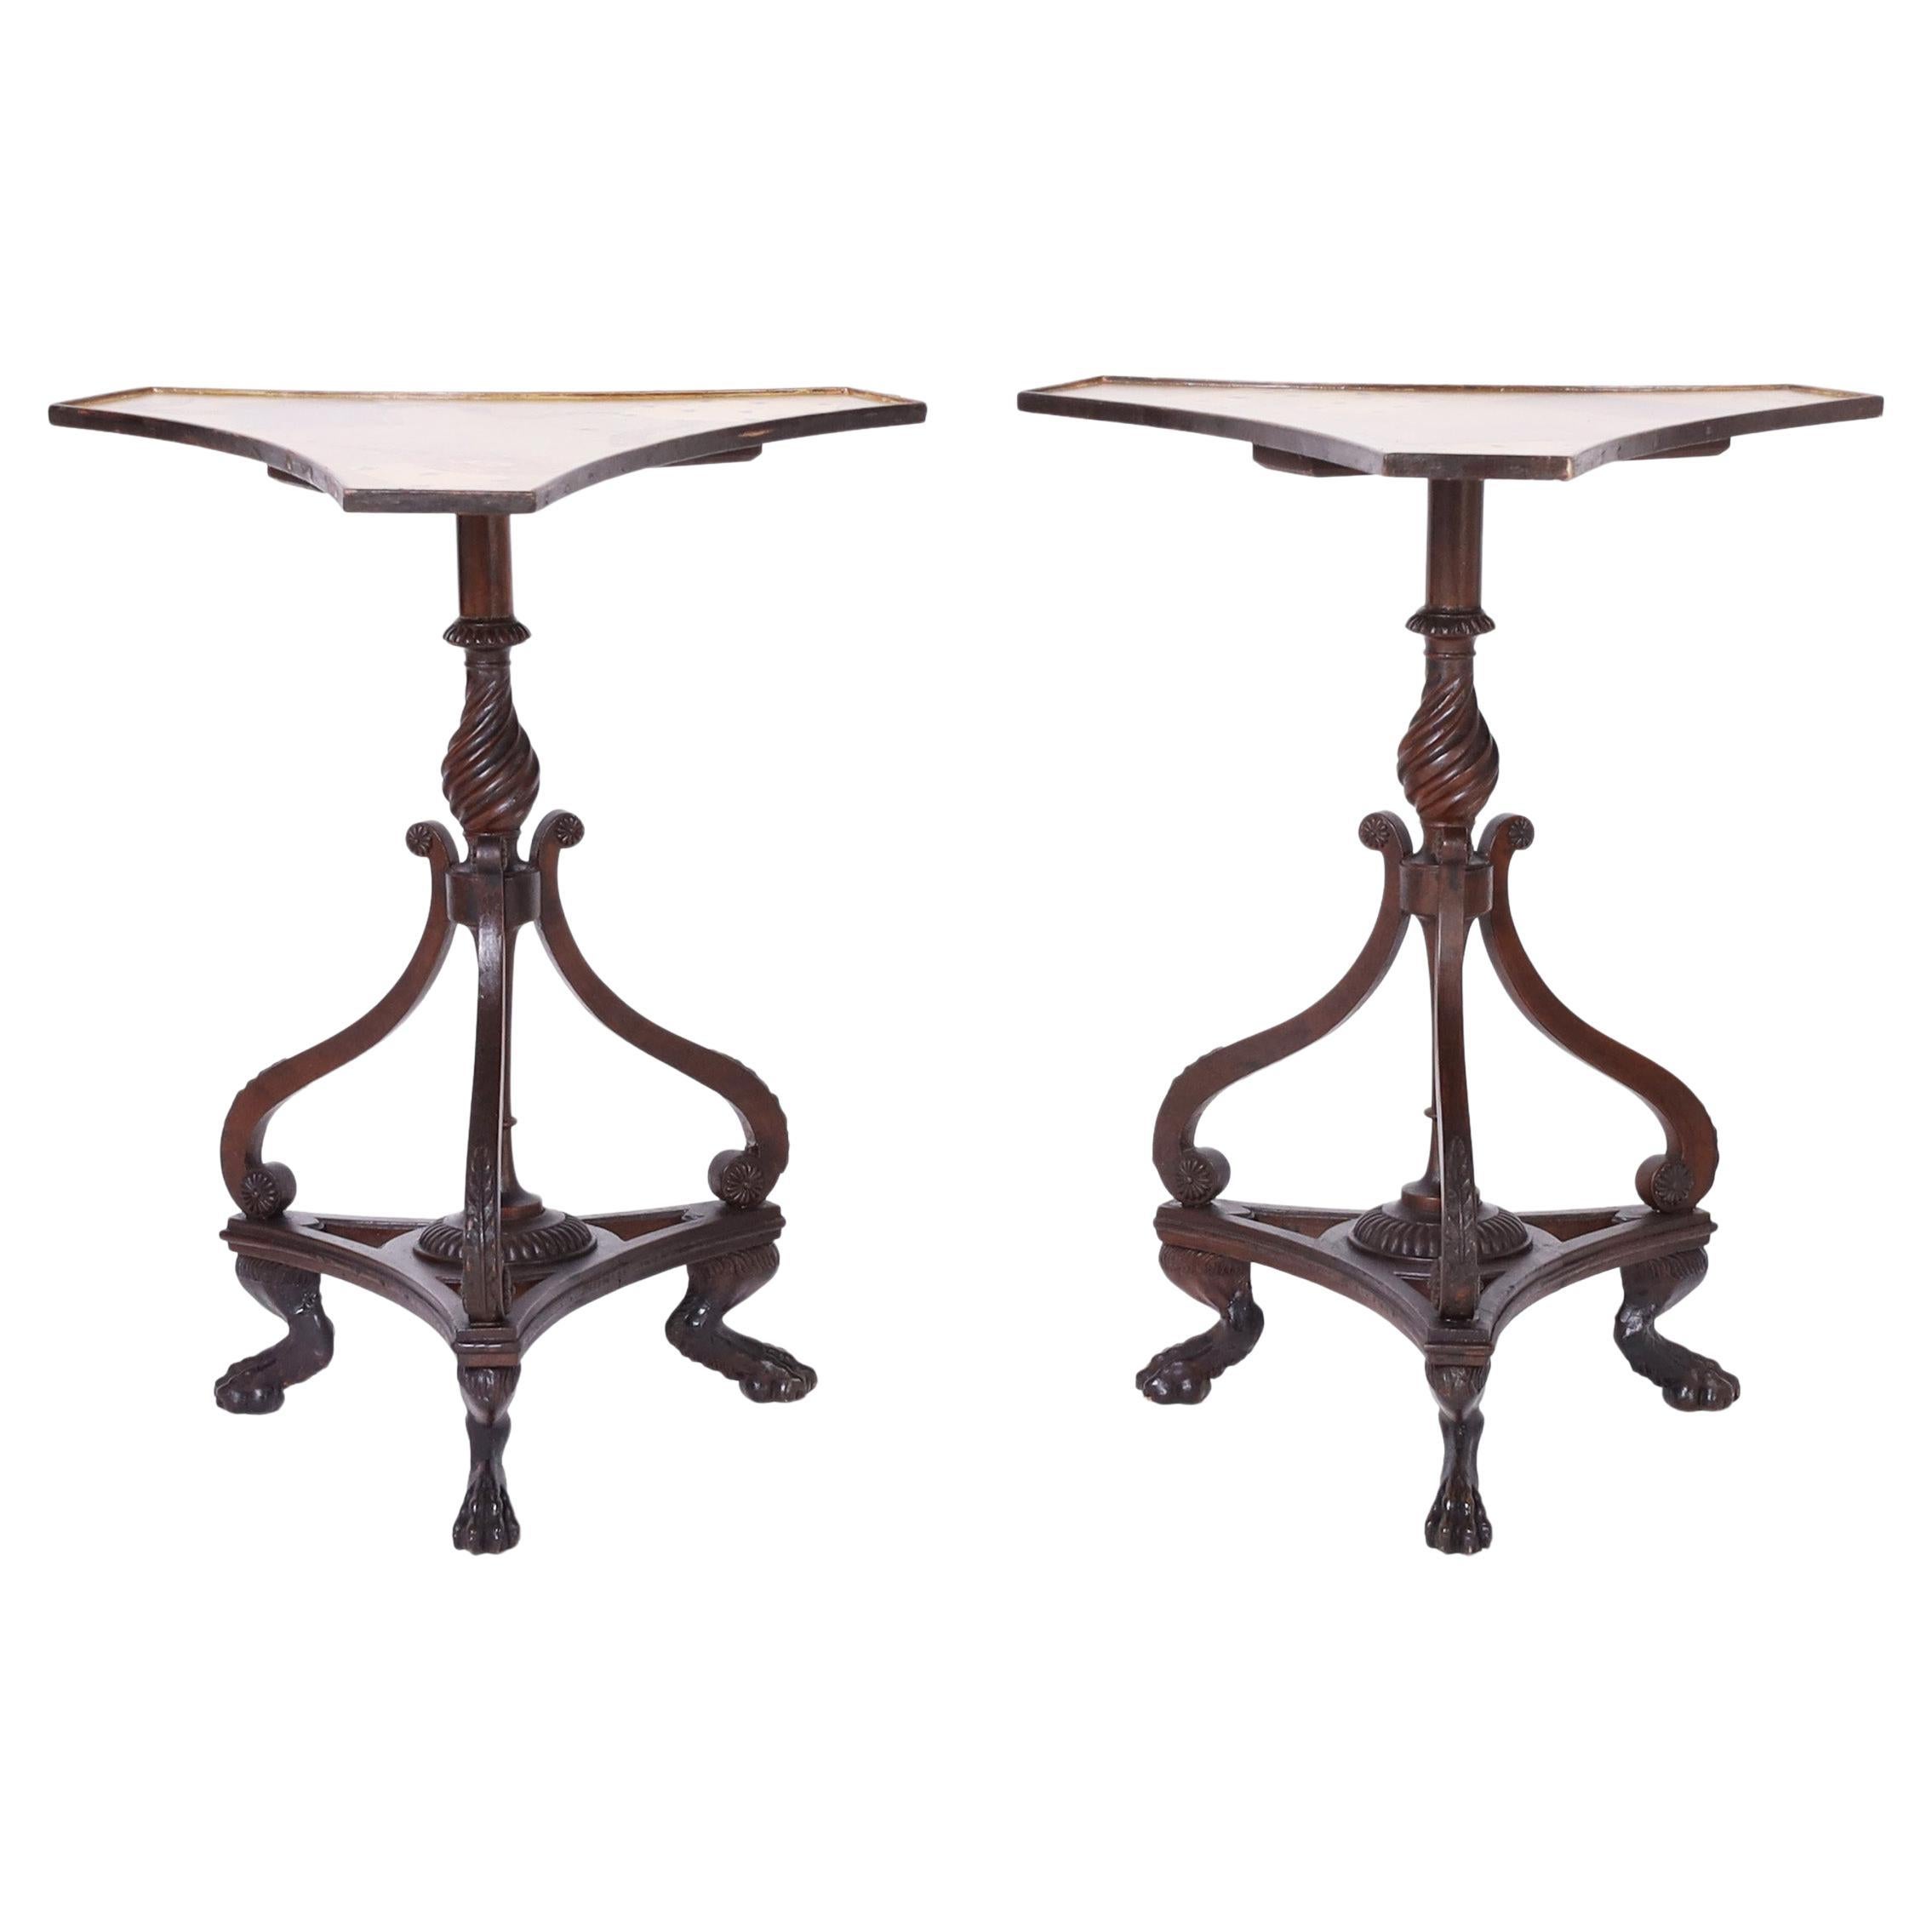  Regency Style Pair of Antique English Stands with Tromp L'oeil Tops